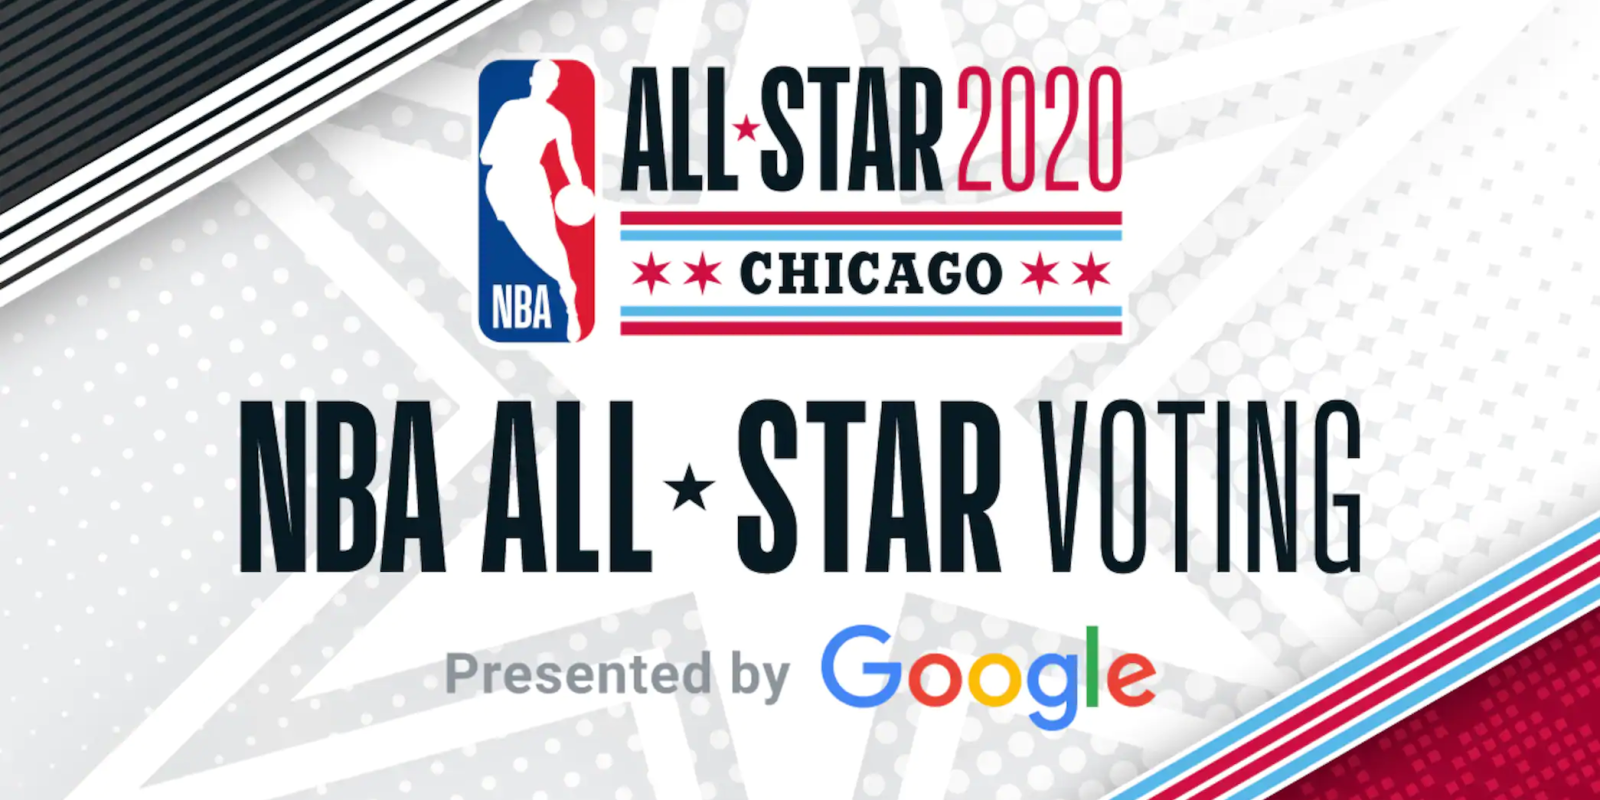 NBA All-Star Voting is again exclusive to Google for 2020 - 9to5Google1600 x 800